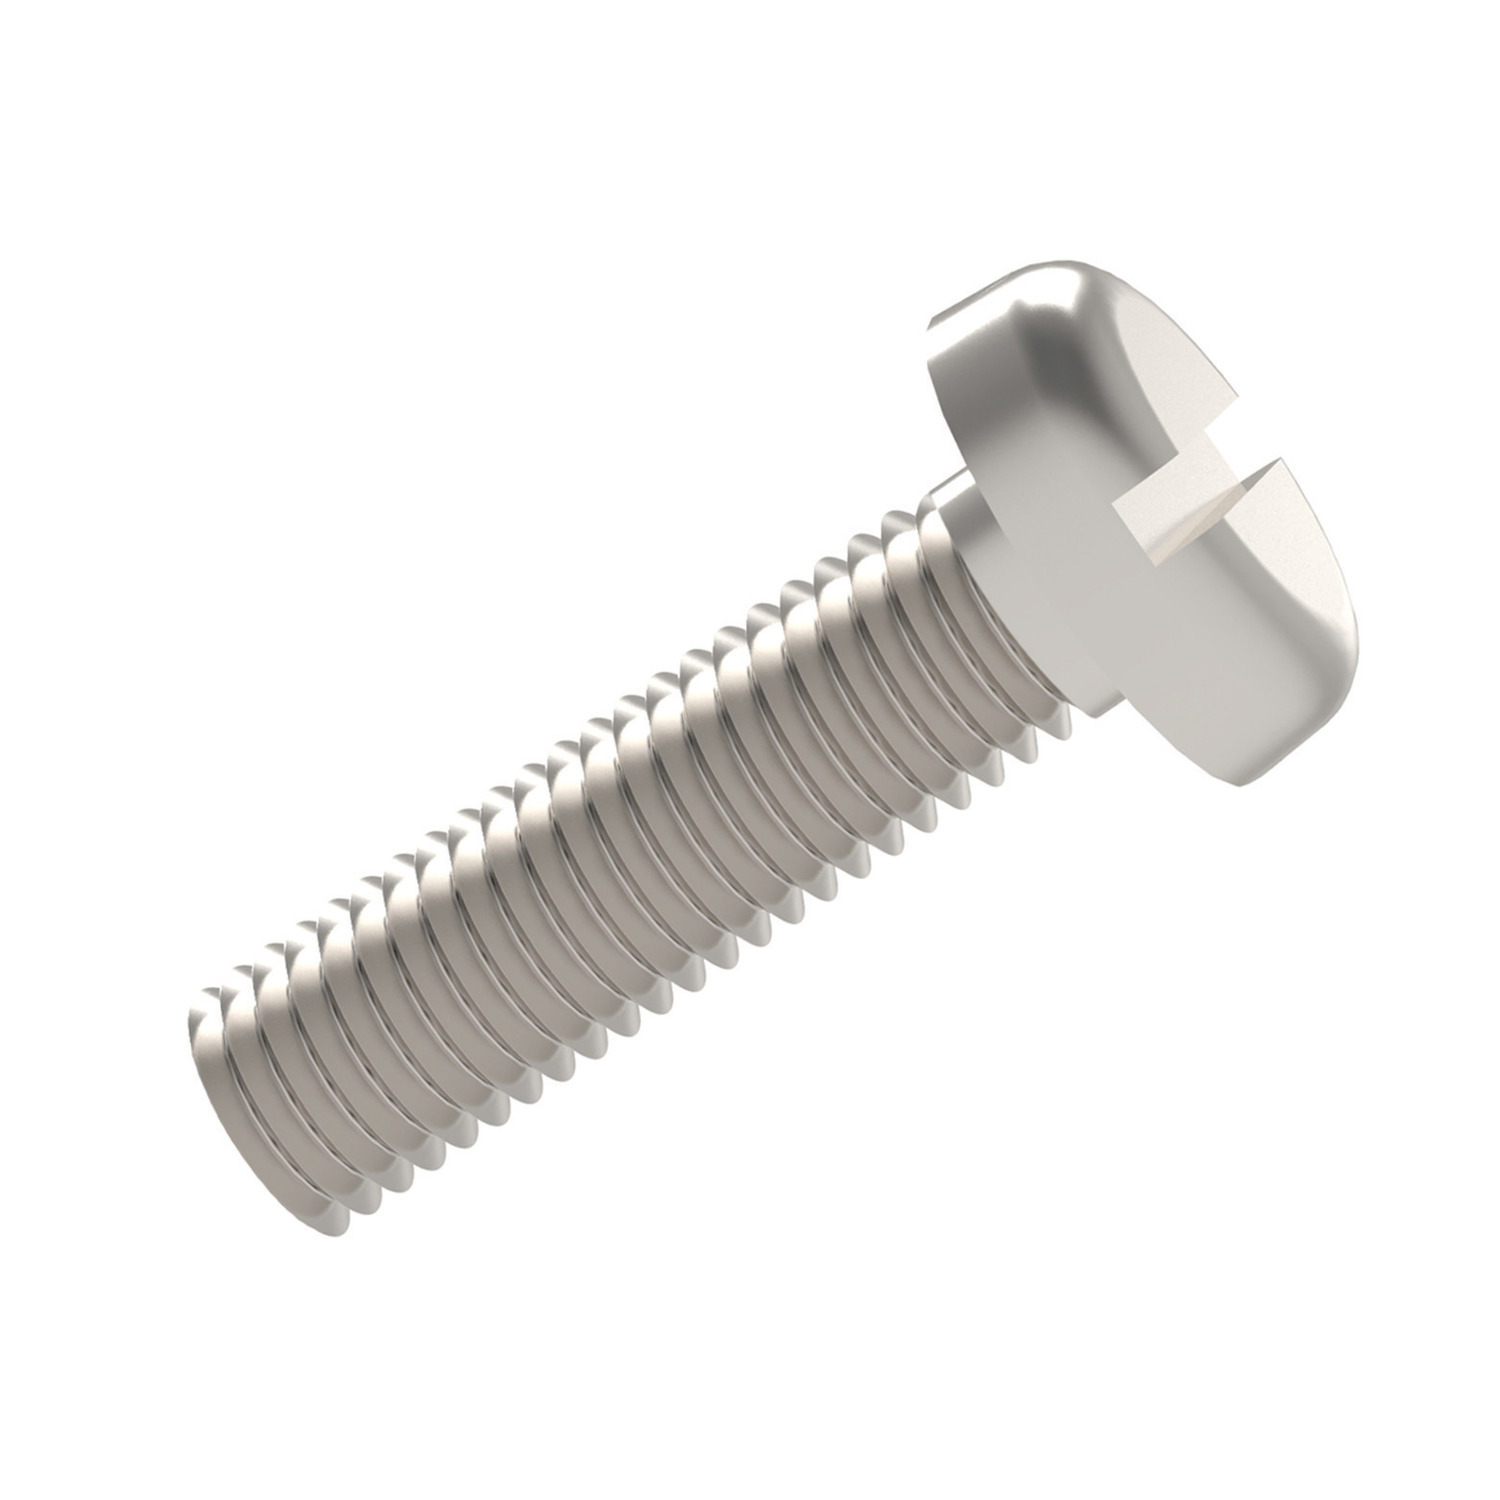 Slot Pan Head Screws Stainless steel A2. Pan head screws are manufactured to DIN 85